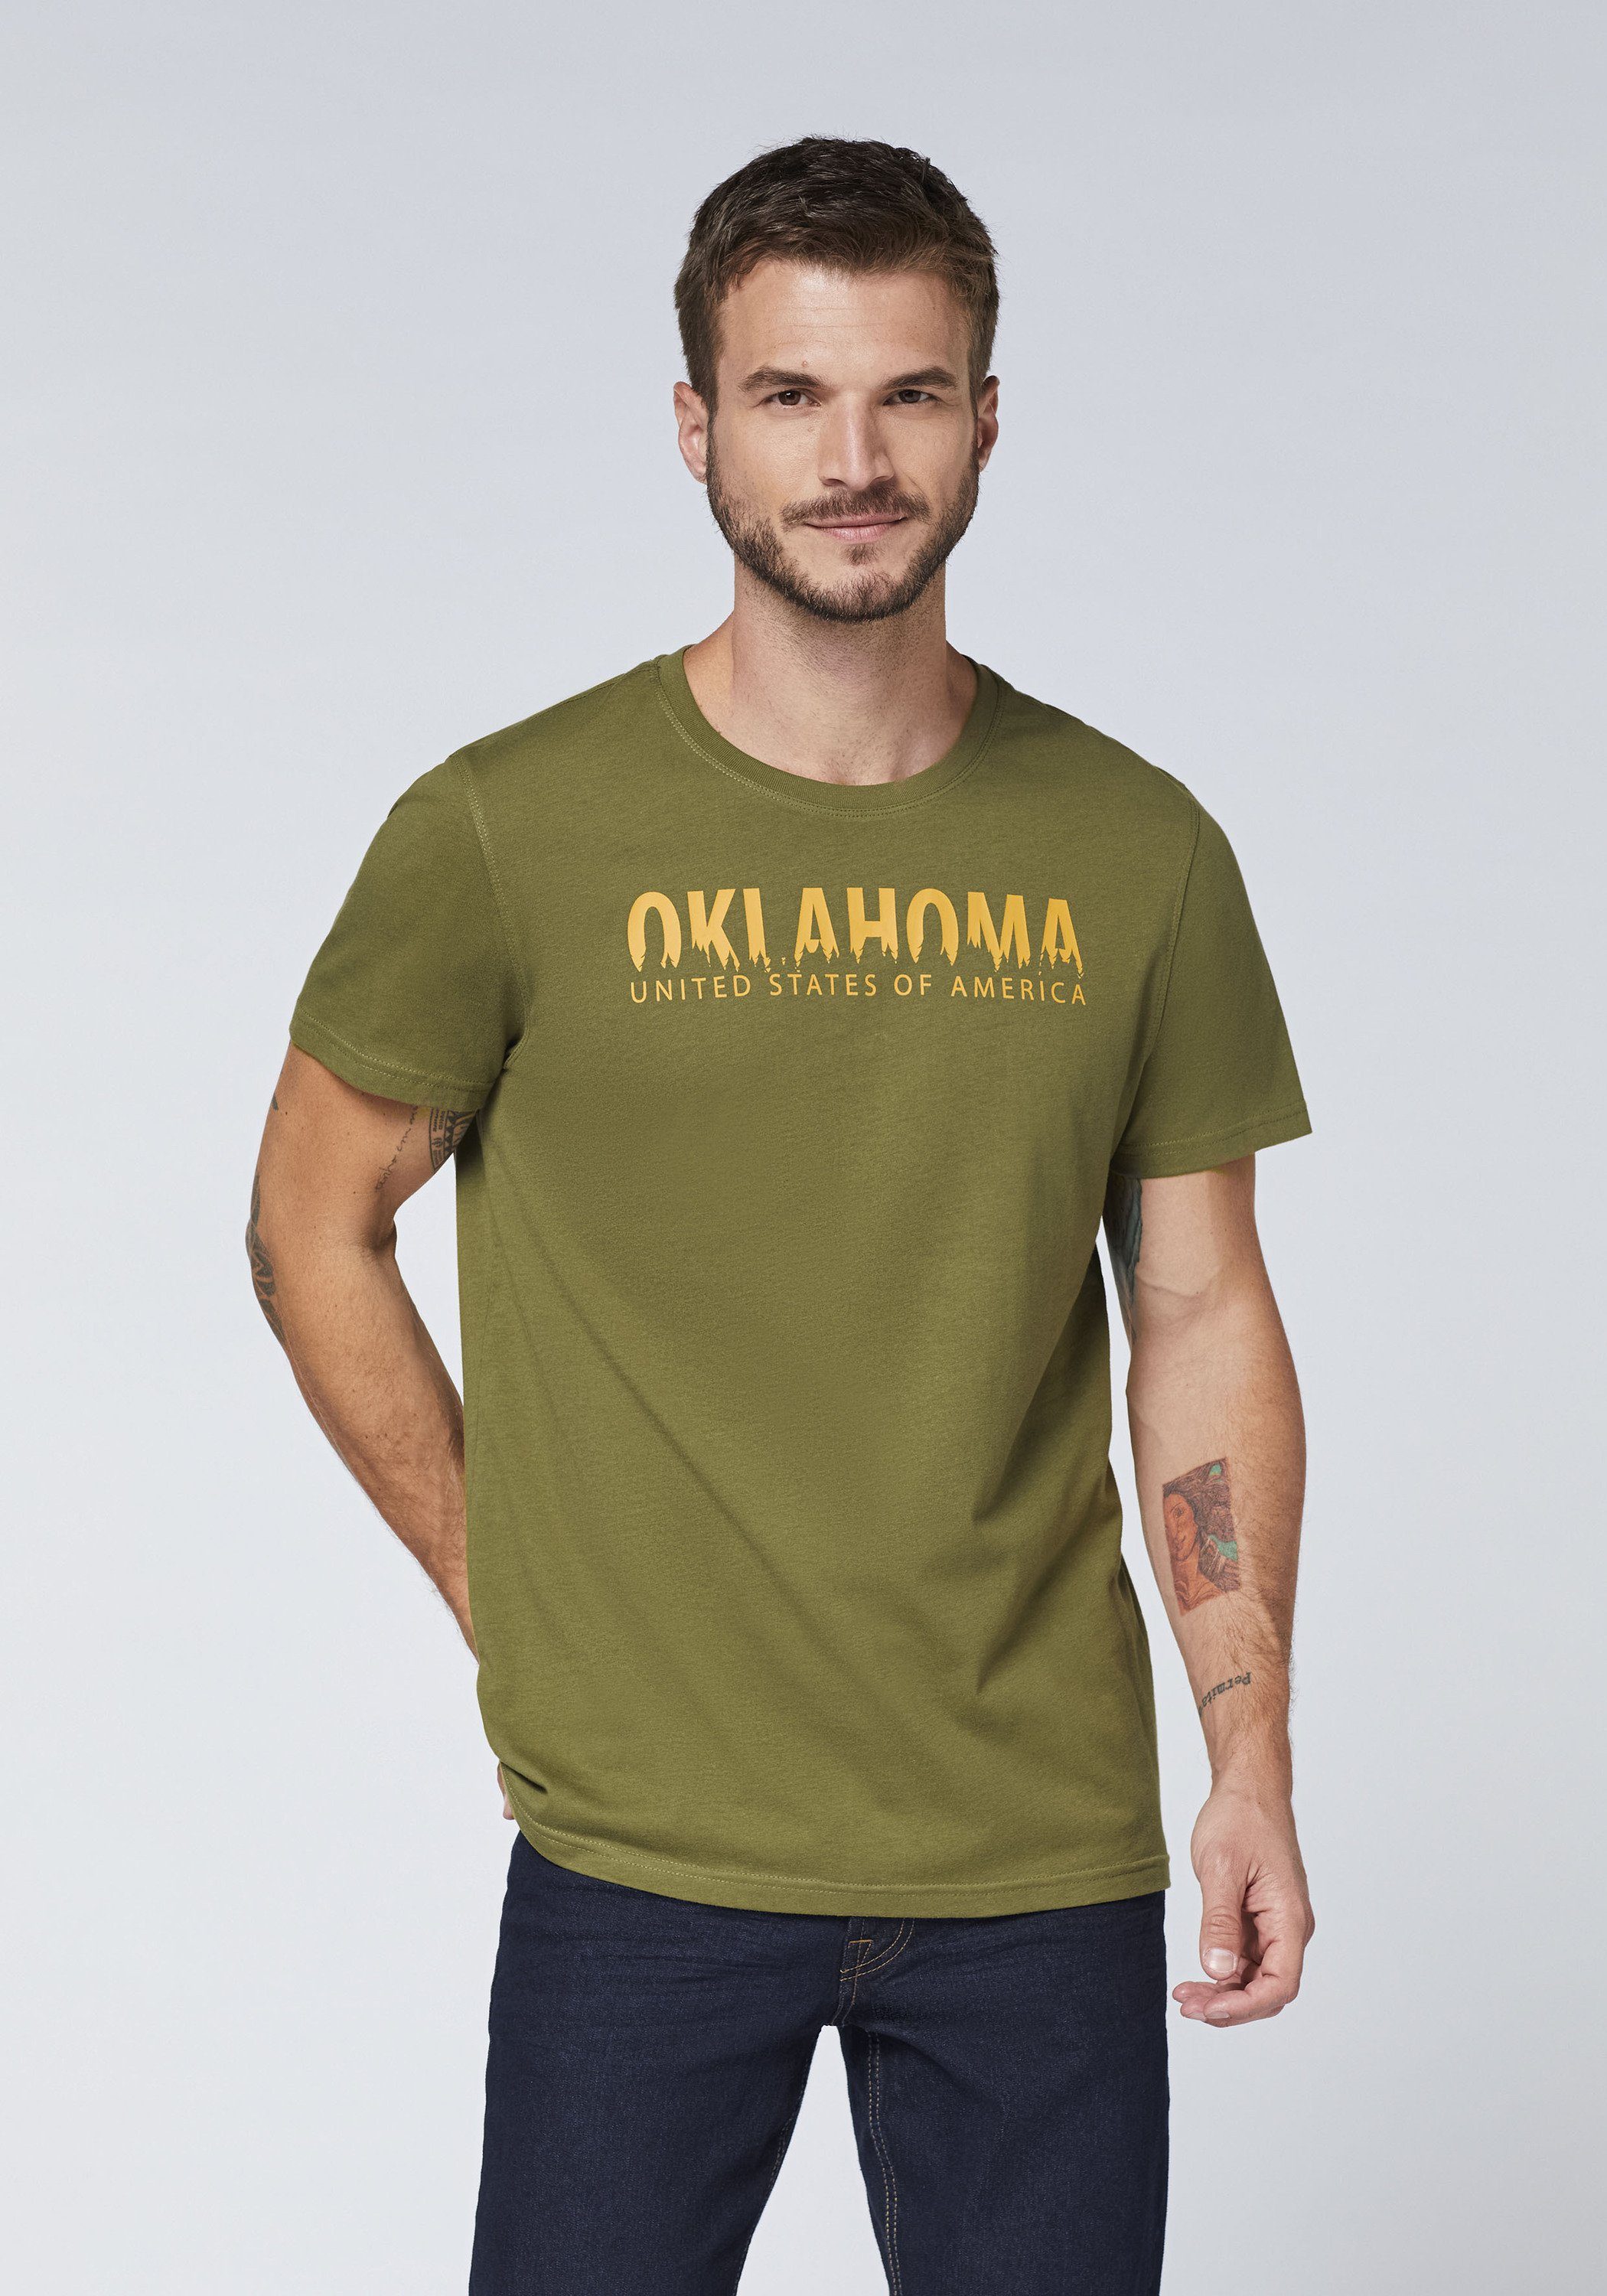 Dusty Jeans im Oklahoma Nature-Label-Look Olive 18-0515 Print-Shirt